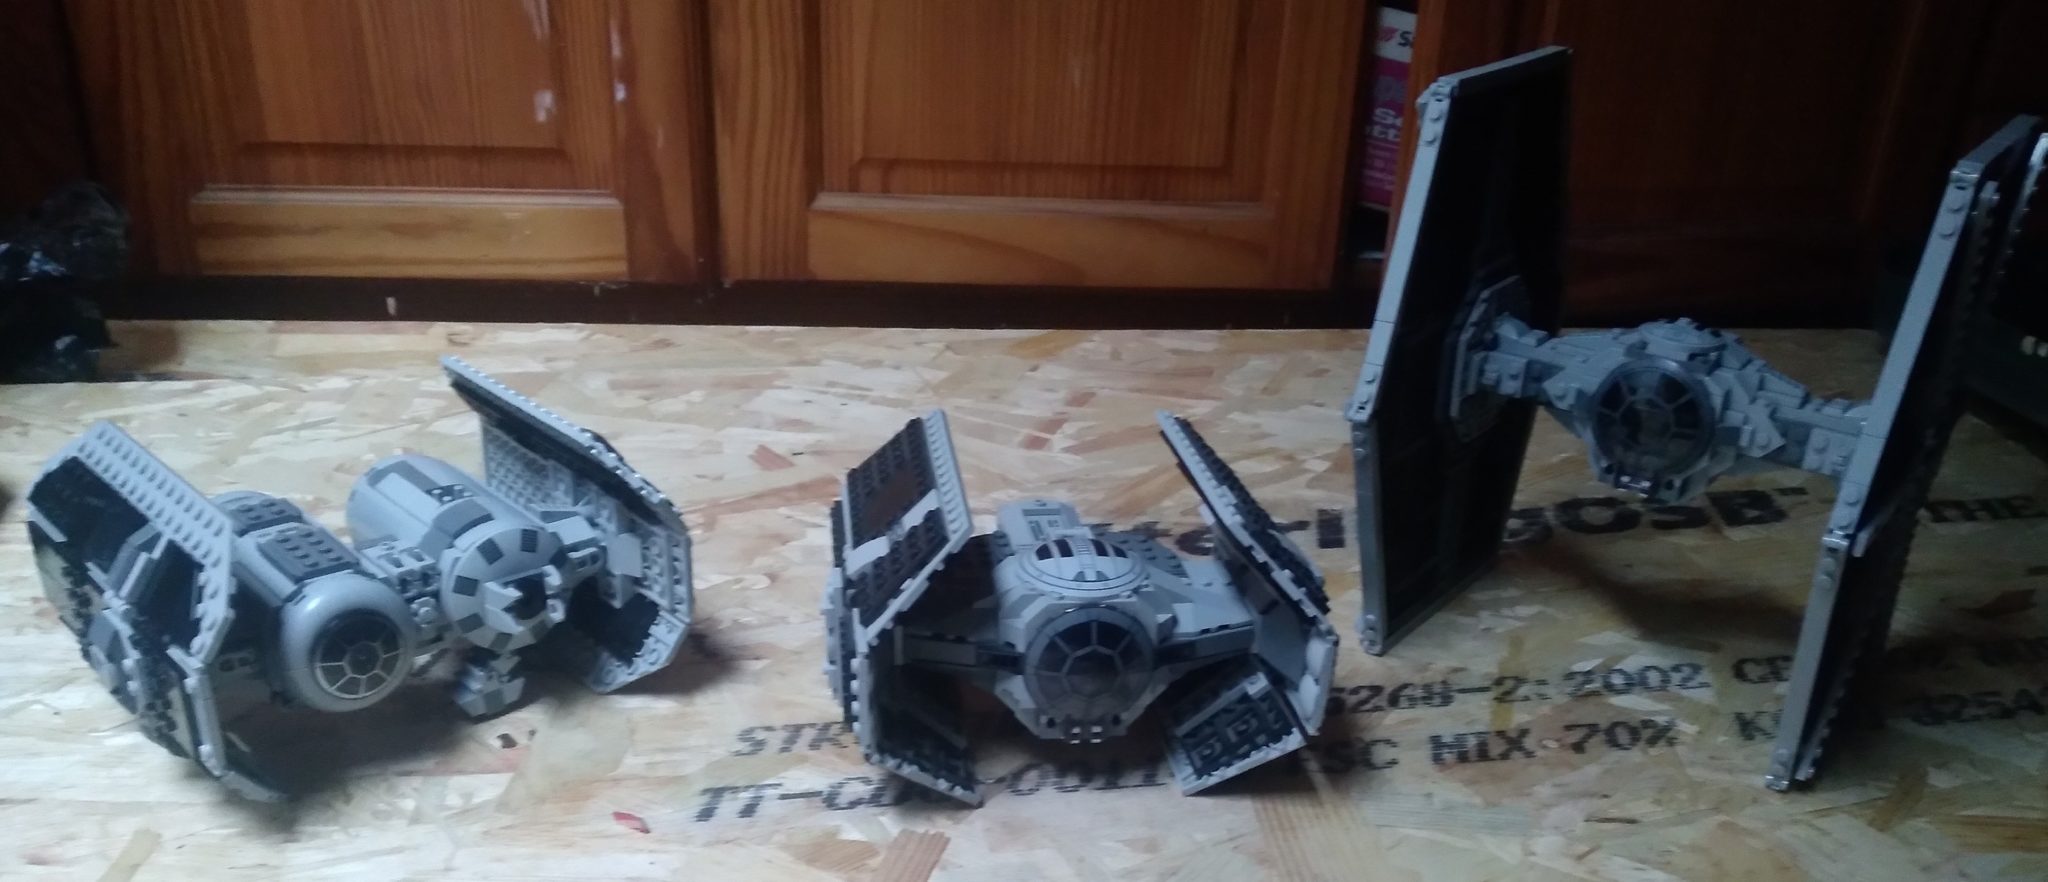 ▻ Review: LEGO Star Wars 75347 Tie Bomber - HOTH BRICKS